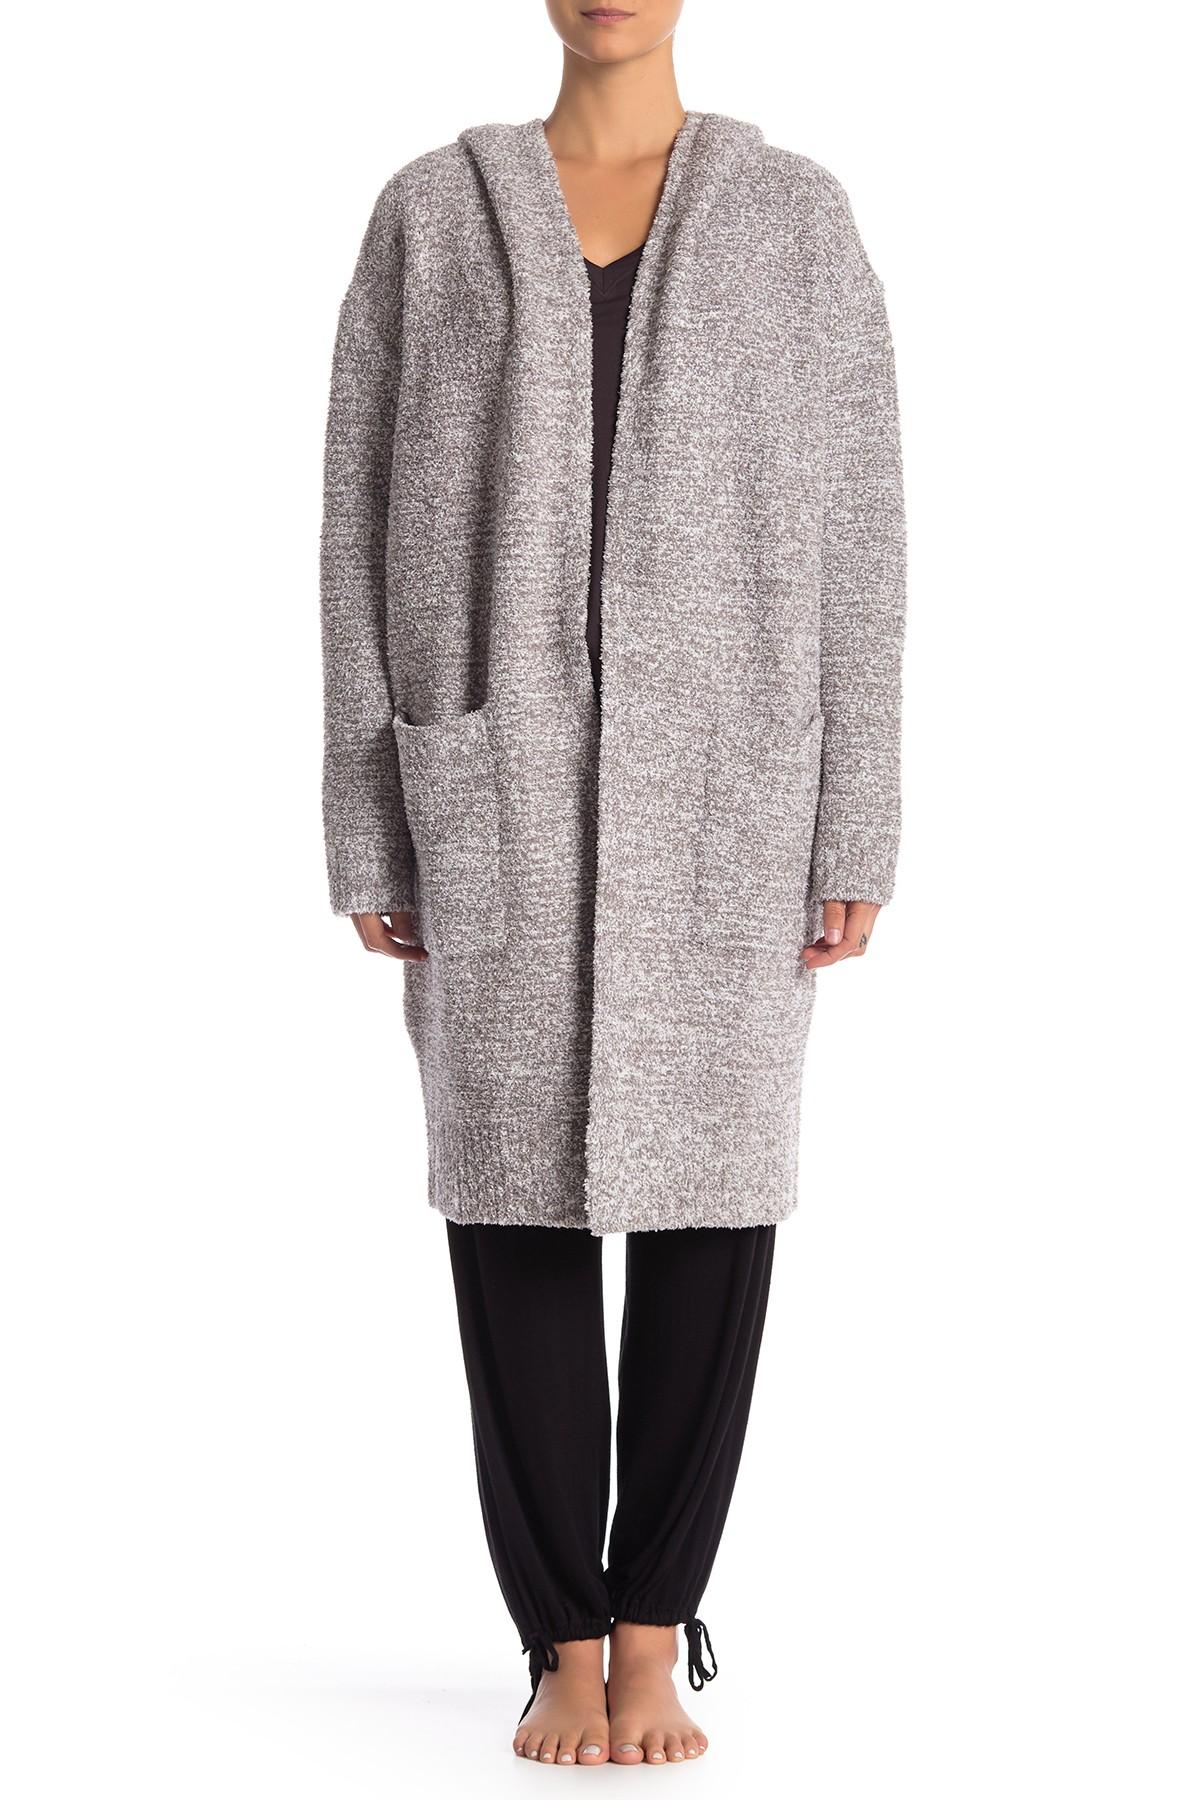 Barefoot Dreams Synthetic Cozychic(r) California Lounge Coat in Gray - Lyst